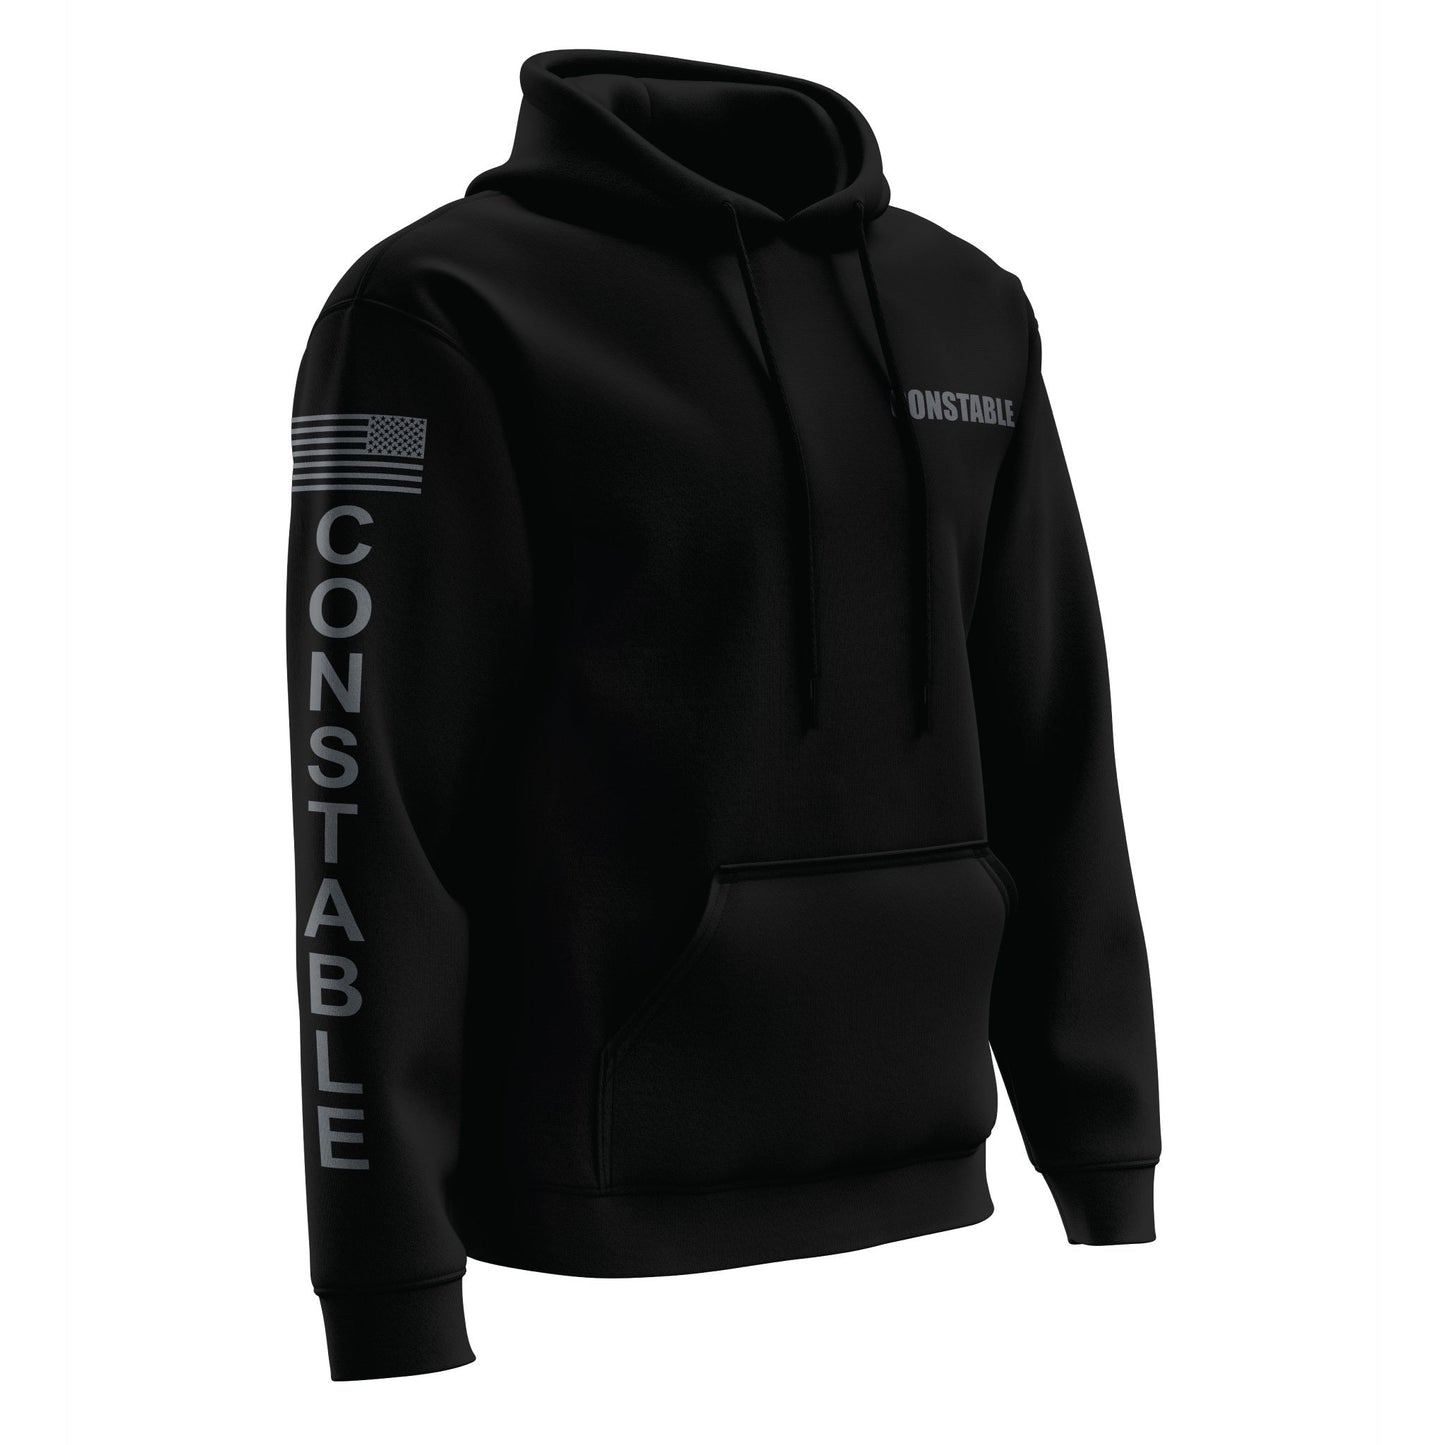 [CONSTABLE] Performance Hoodie 2.0 [BLK/GRY]-13 Fifty Apparel